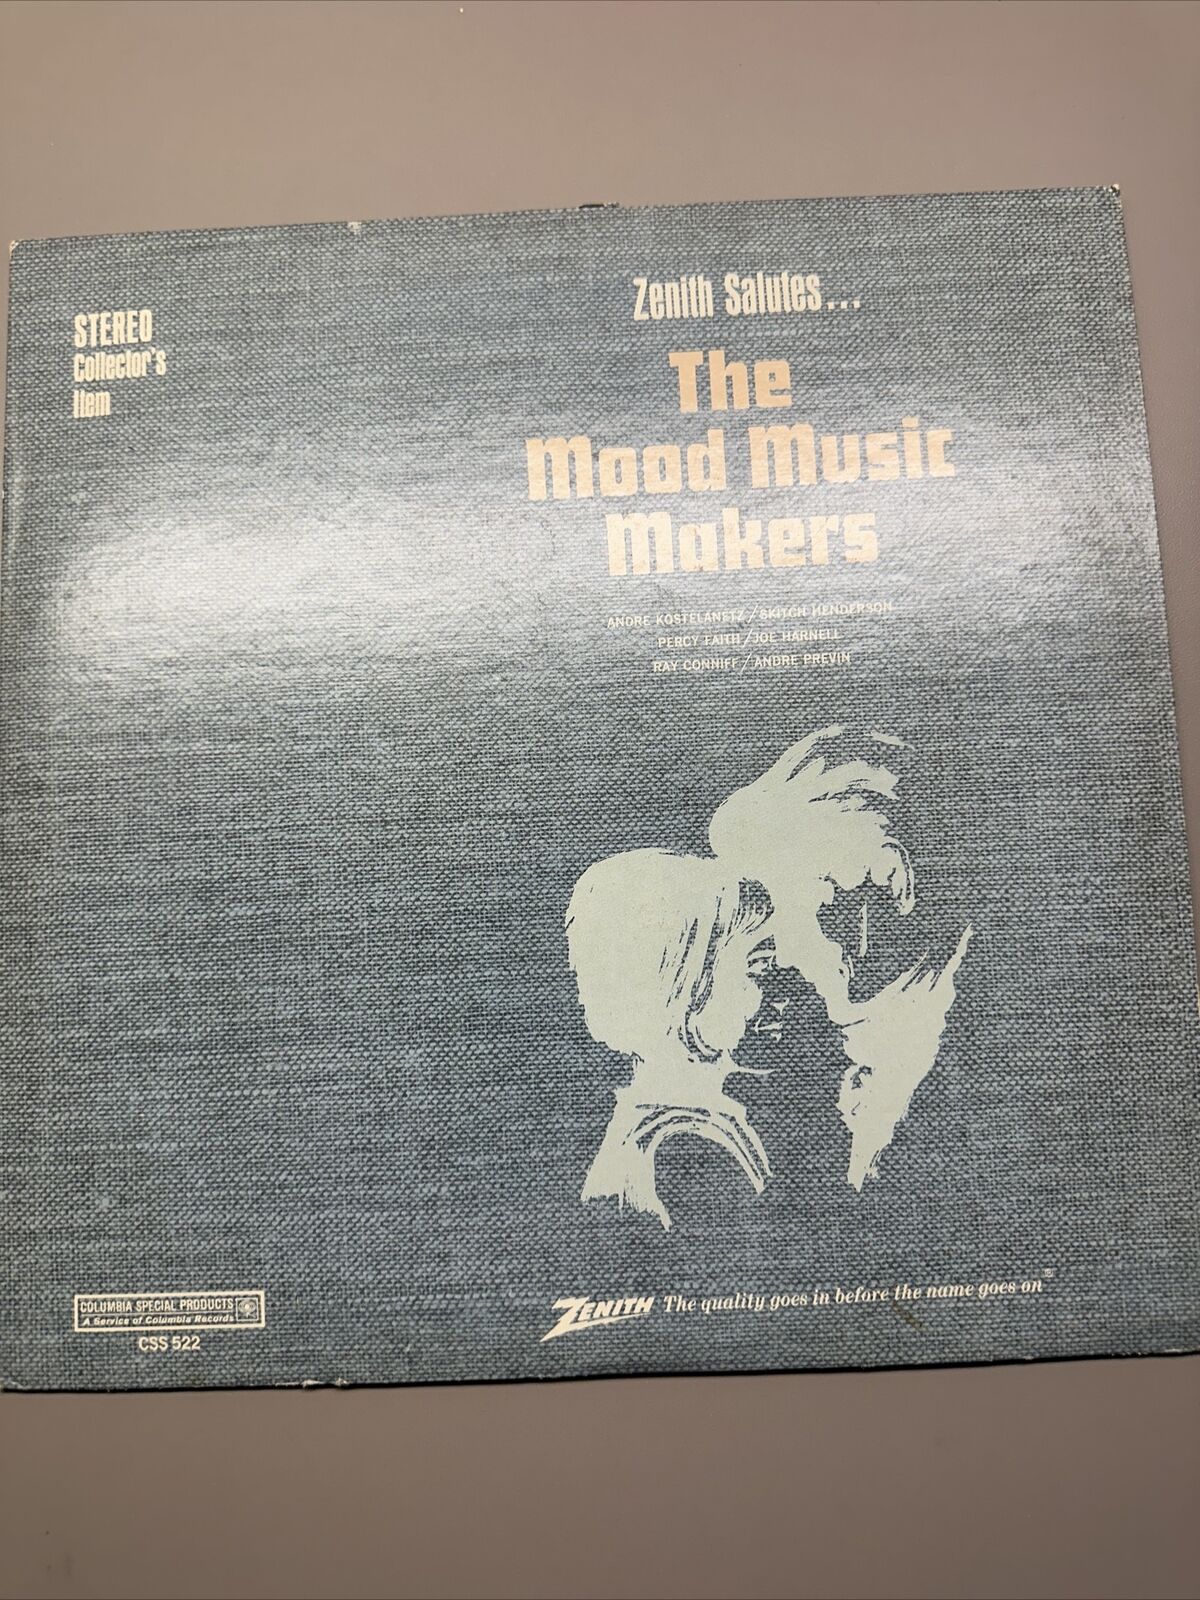 Various ‎– Zenith Salutes... The Mood Music Makers CSS 522